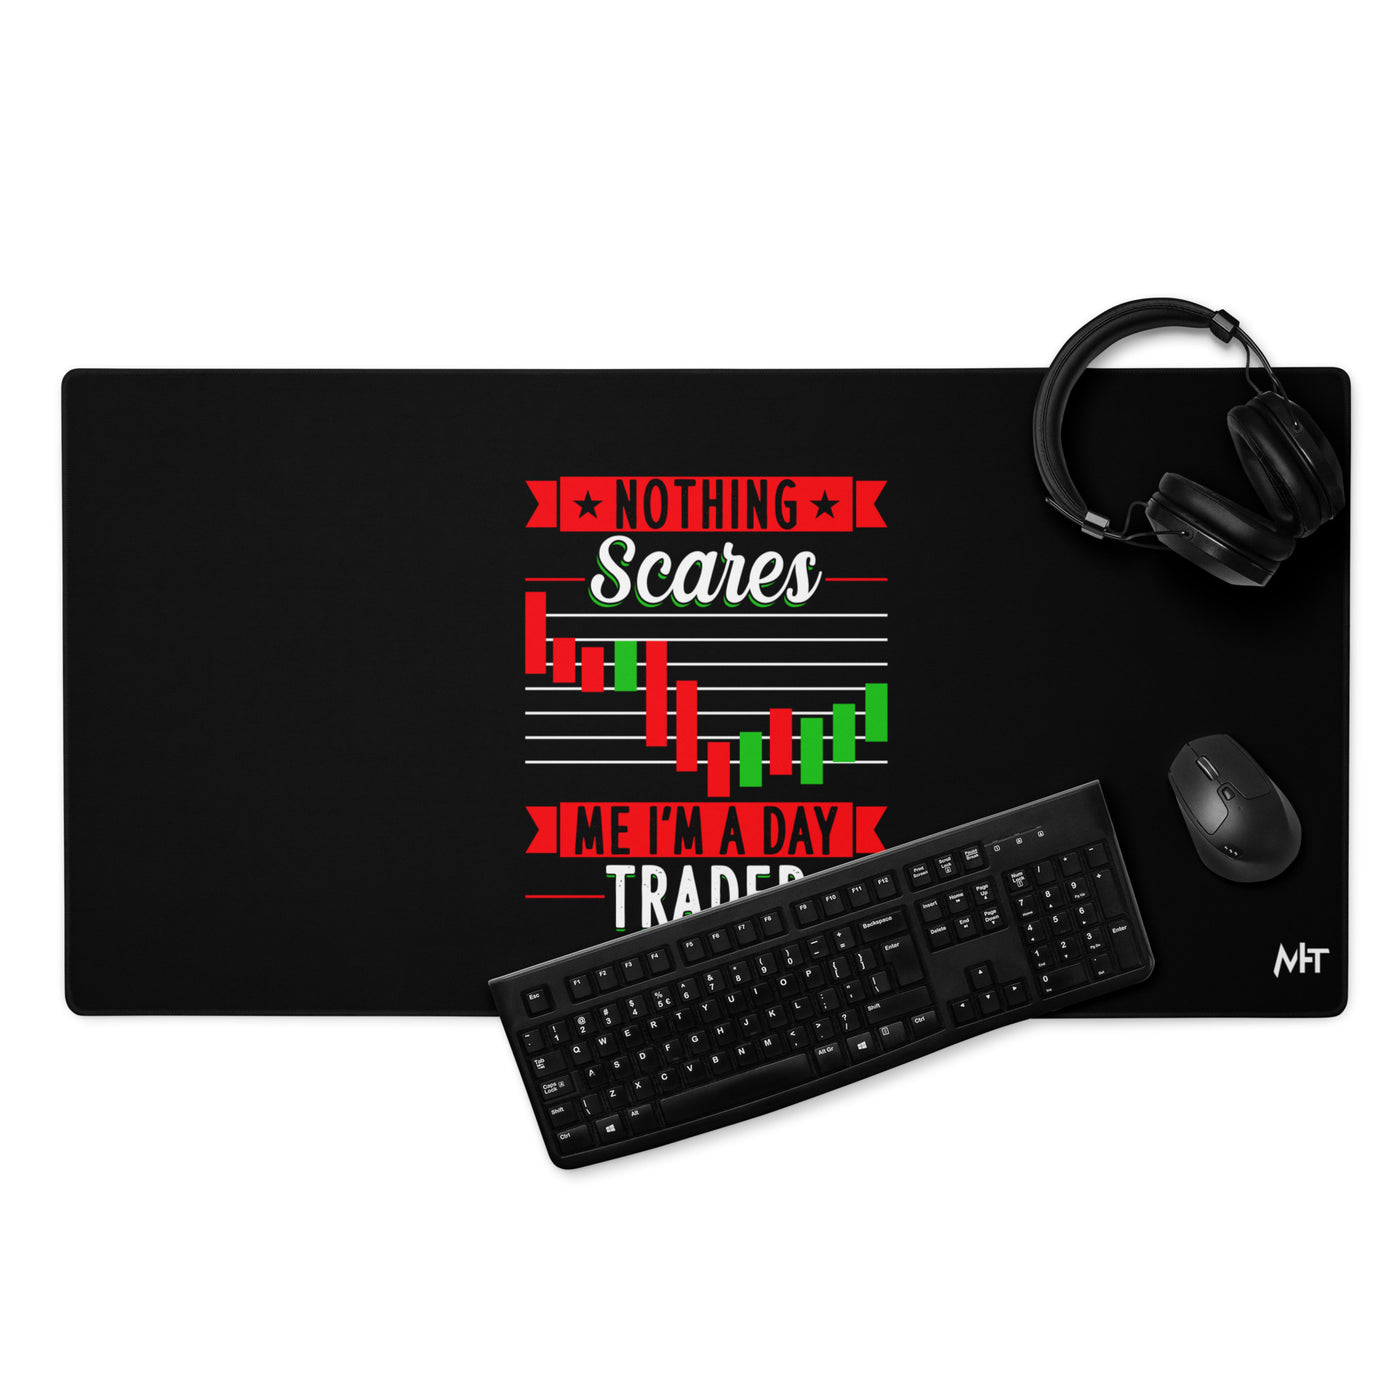 Nothing Scares me; I Am a Day Trader - Desk Mat